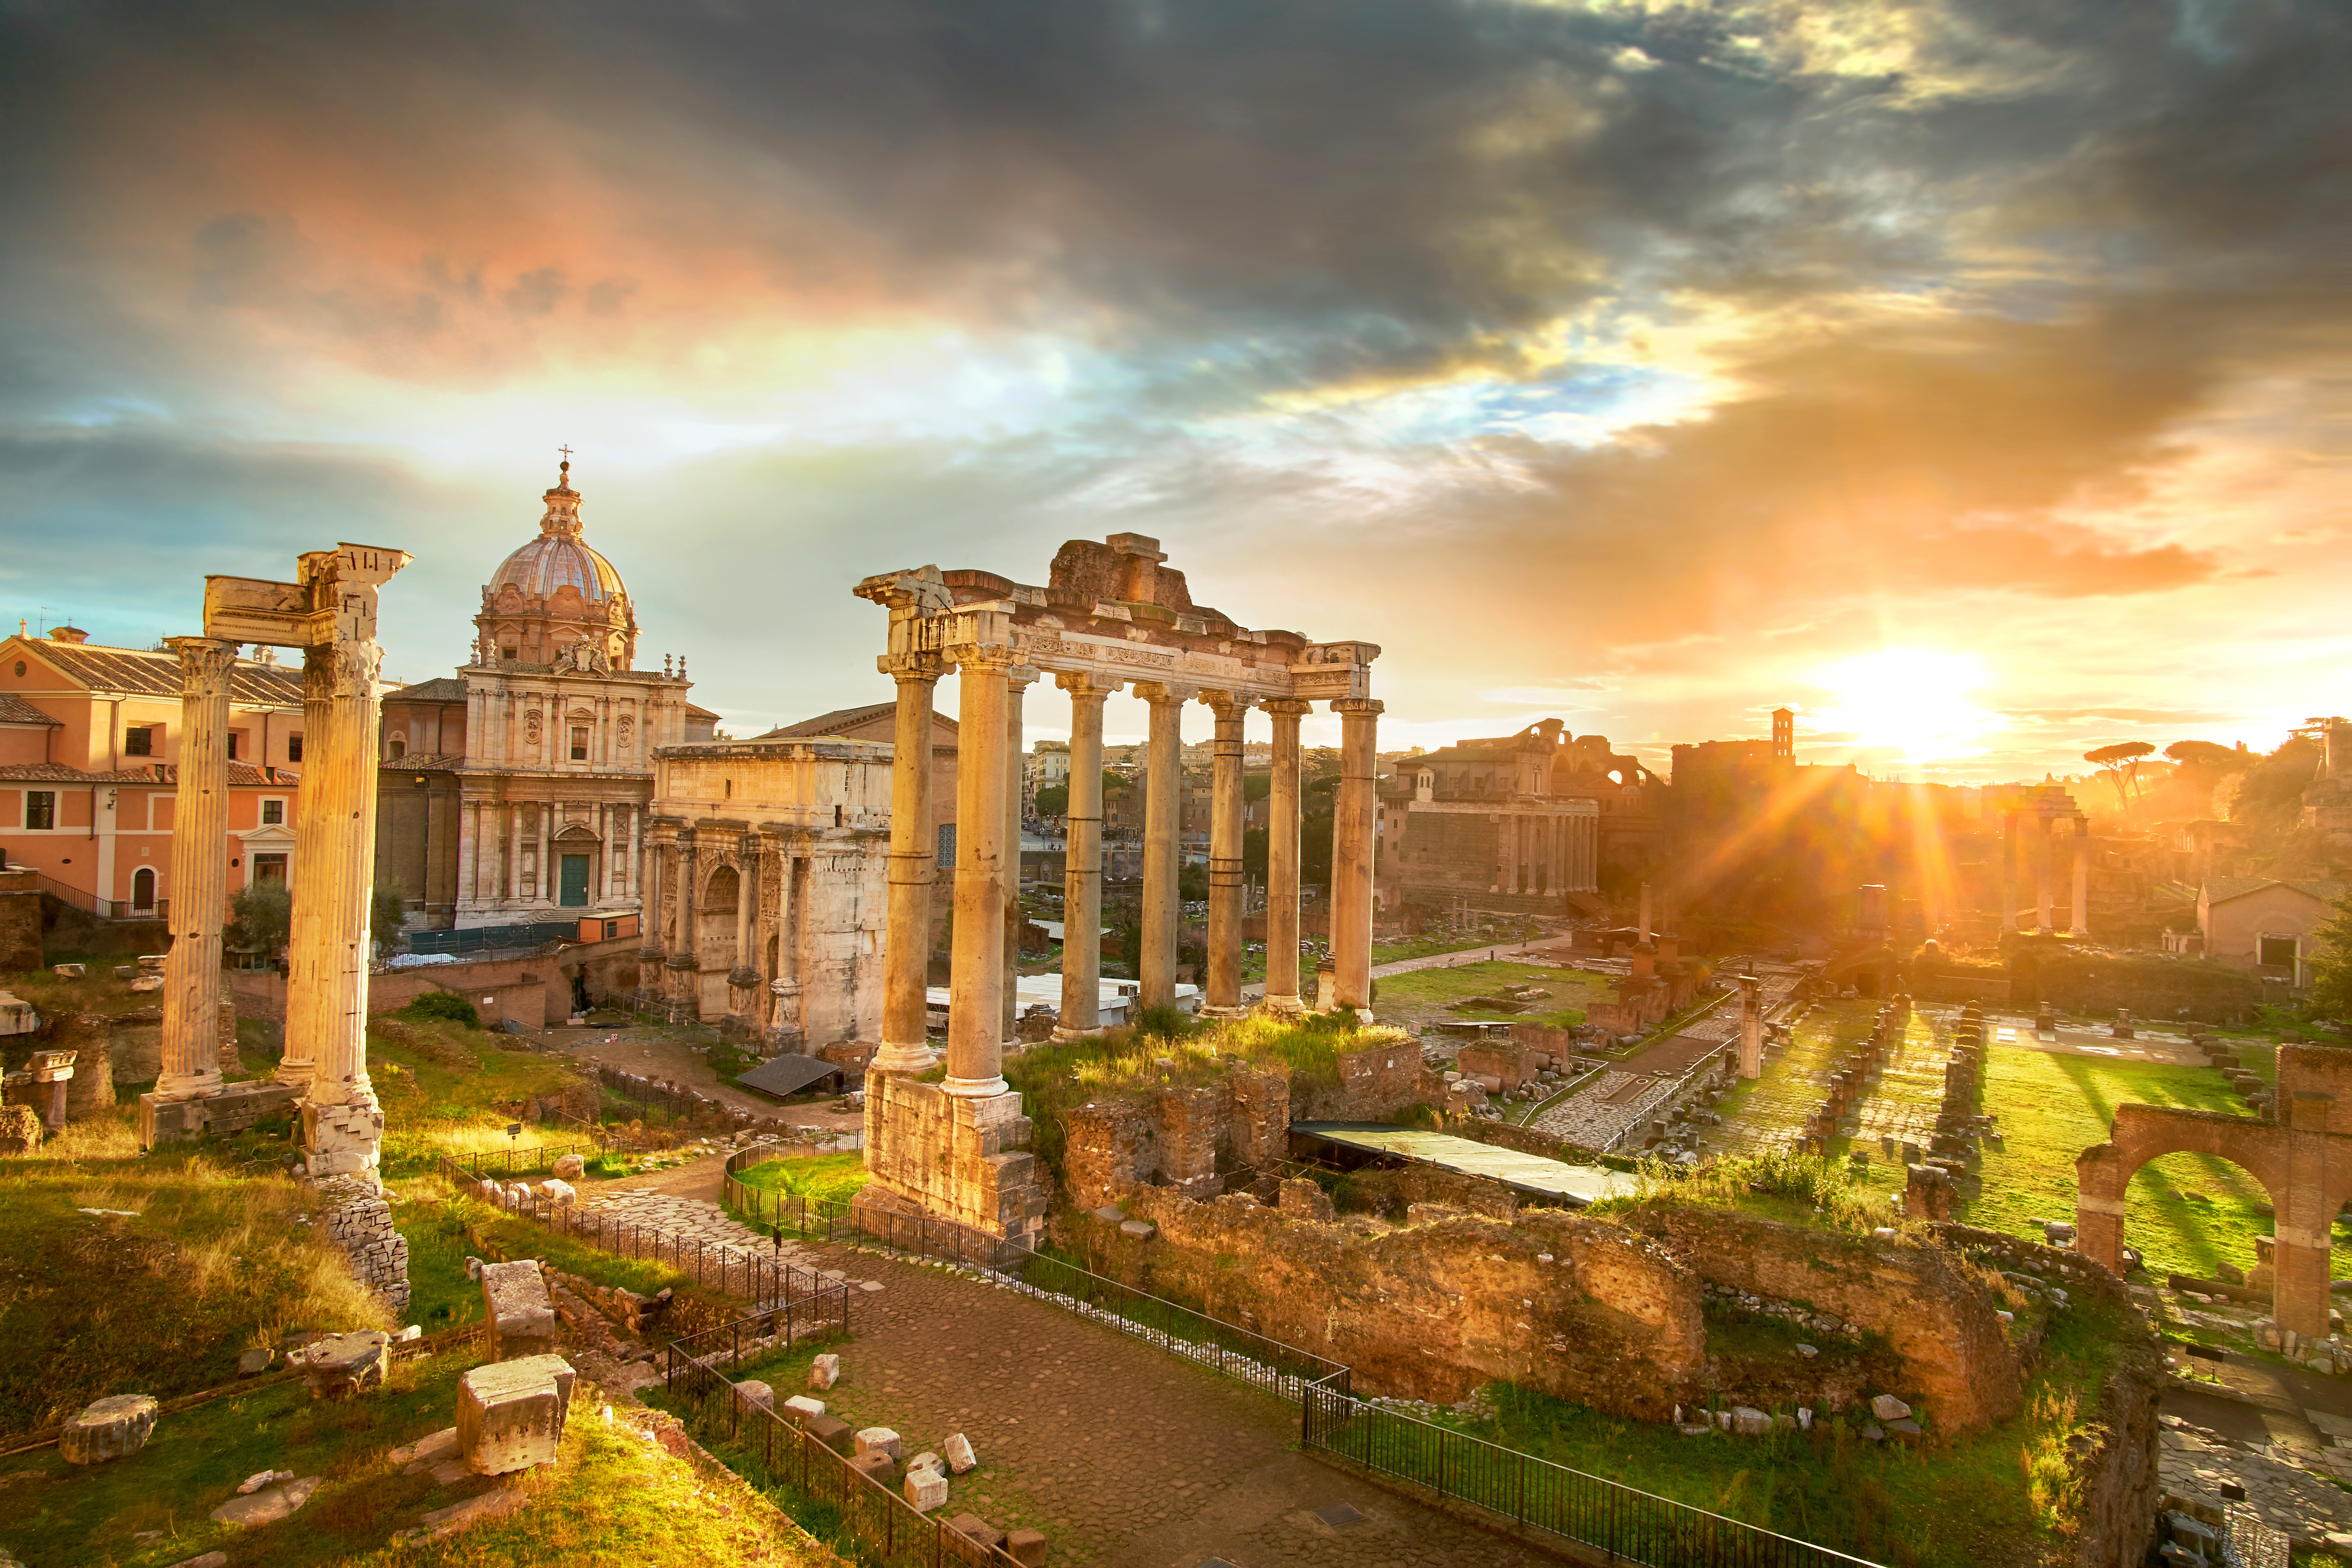 Get an early start on your tour of Rome! Experience the magical golden moment of sunrise as seen from the hills of Rome as rays of sunshine spill over glistening church domes or choose a walking tour with an early start. With both tours you'll experience Rome in a rare moment of the day when the crowds have not yet arrived. Take perfect photos and get a close of view of Rome's most famous sights.